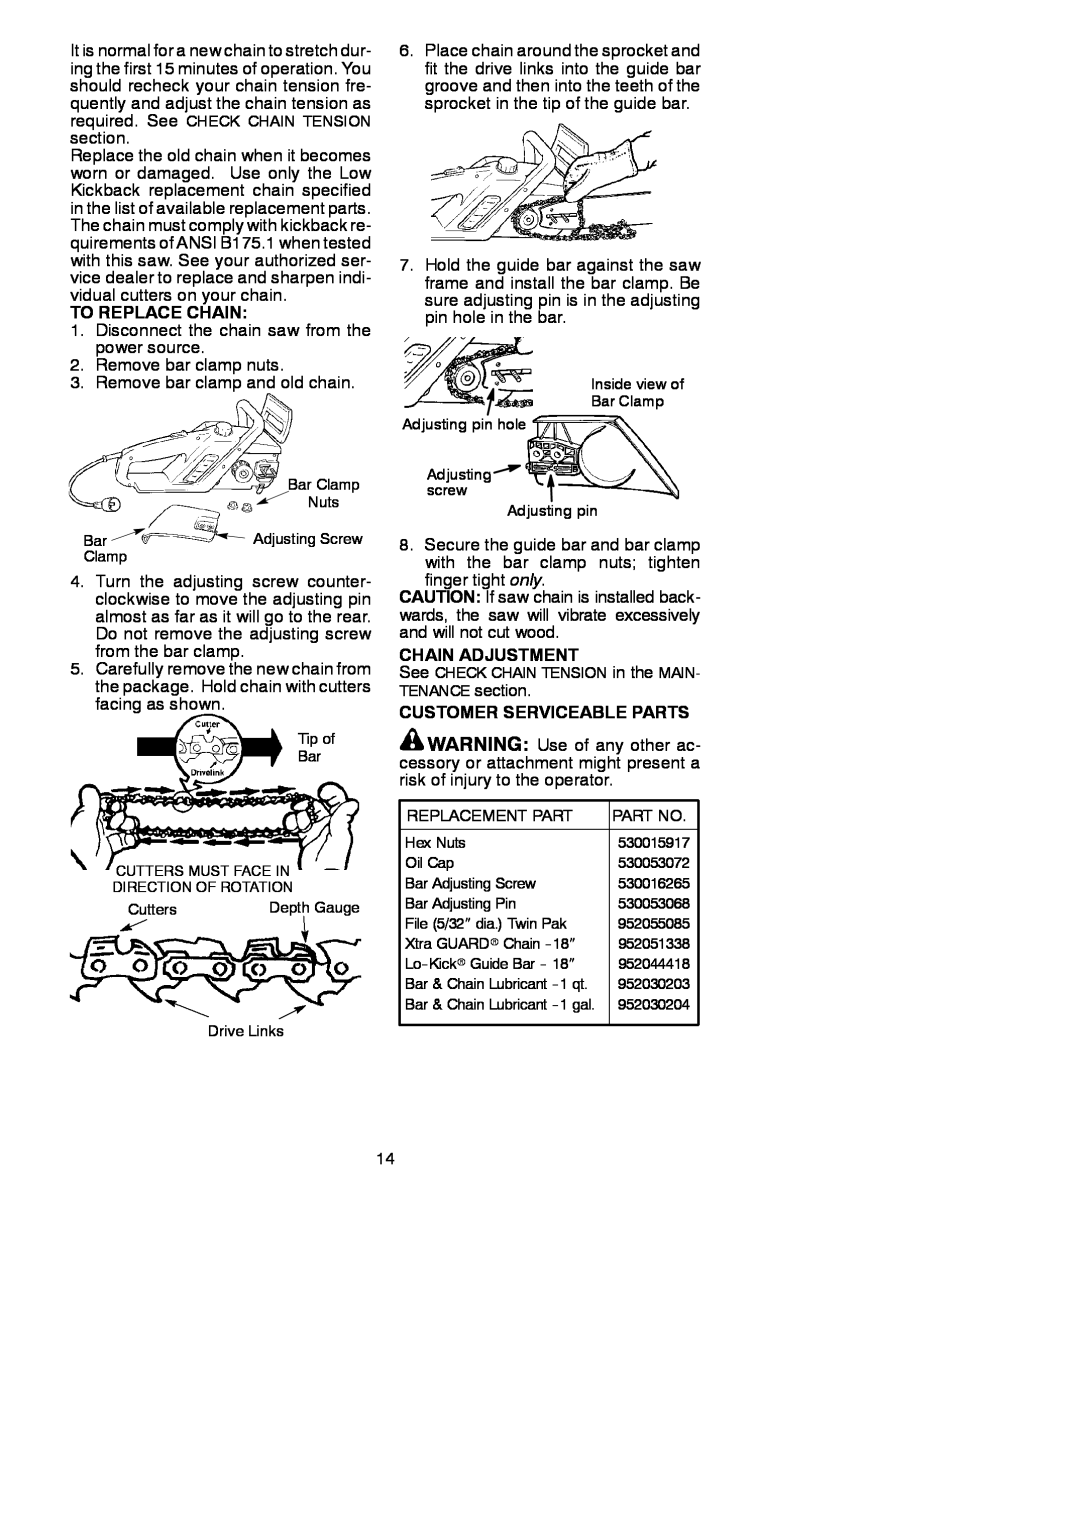 Poulan PP400E instruction manual To Replace Chain, Chain Adjustment, Customer Serviceable Parts 